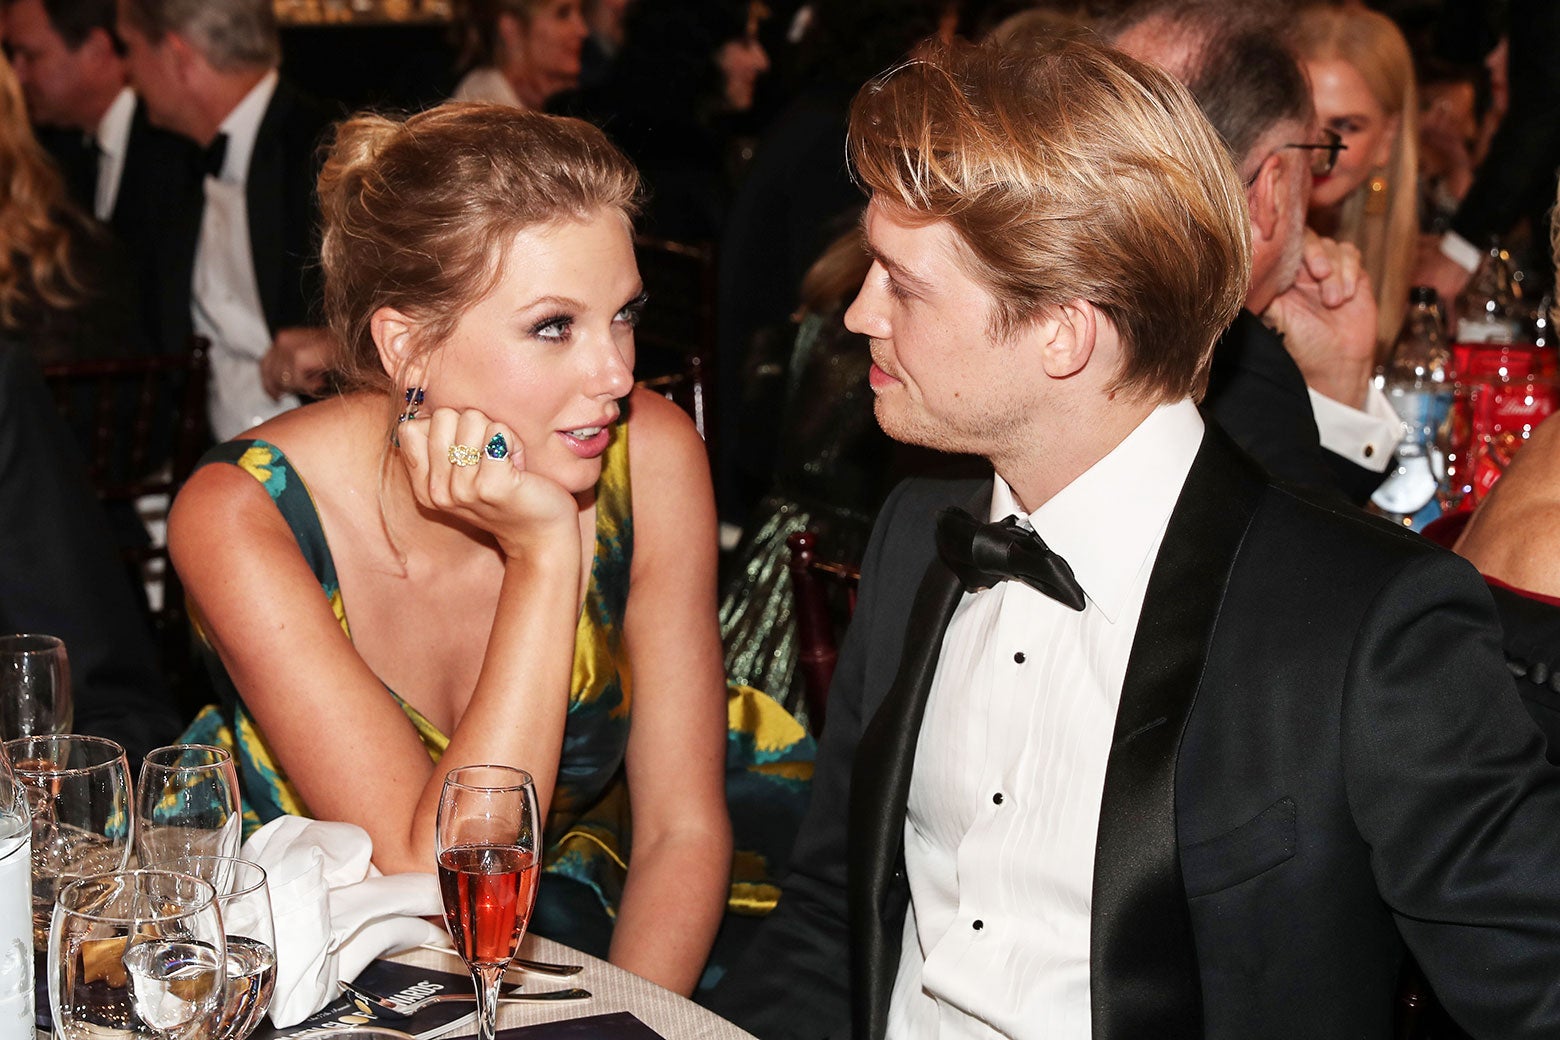 Taylor and Joe sit next to each other at a dinning table in formal wear. Taylor rests her chin on her hand and looks into Joe's eyes.